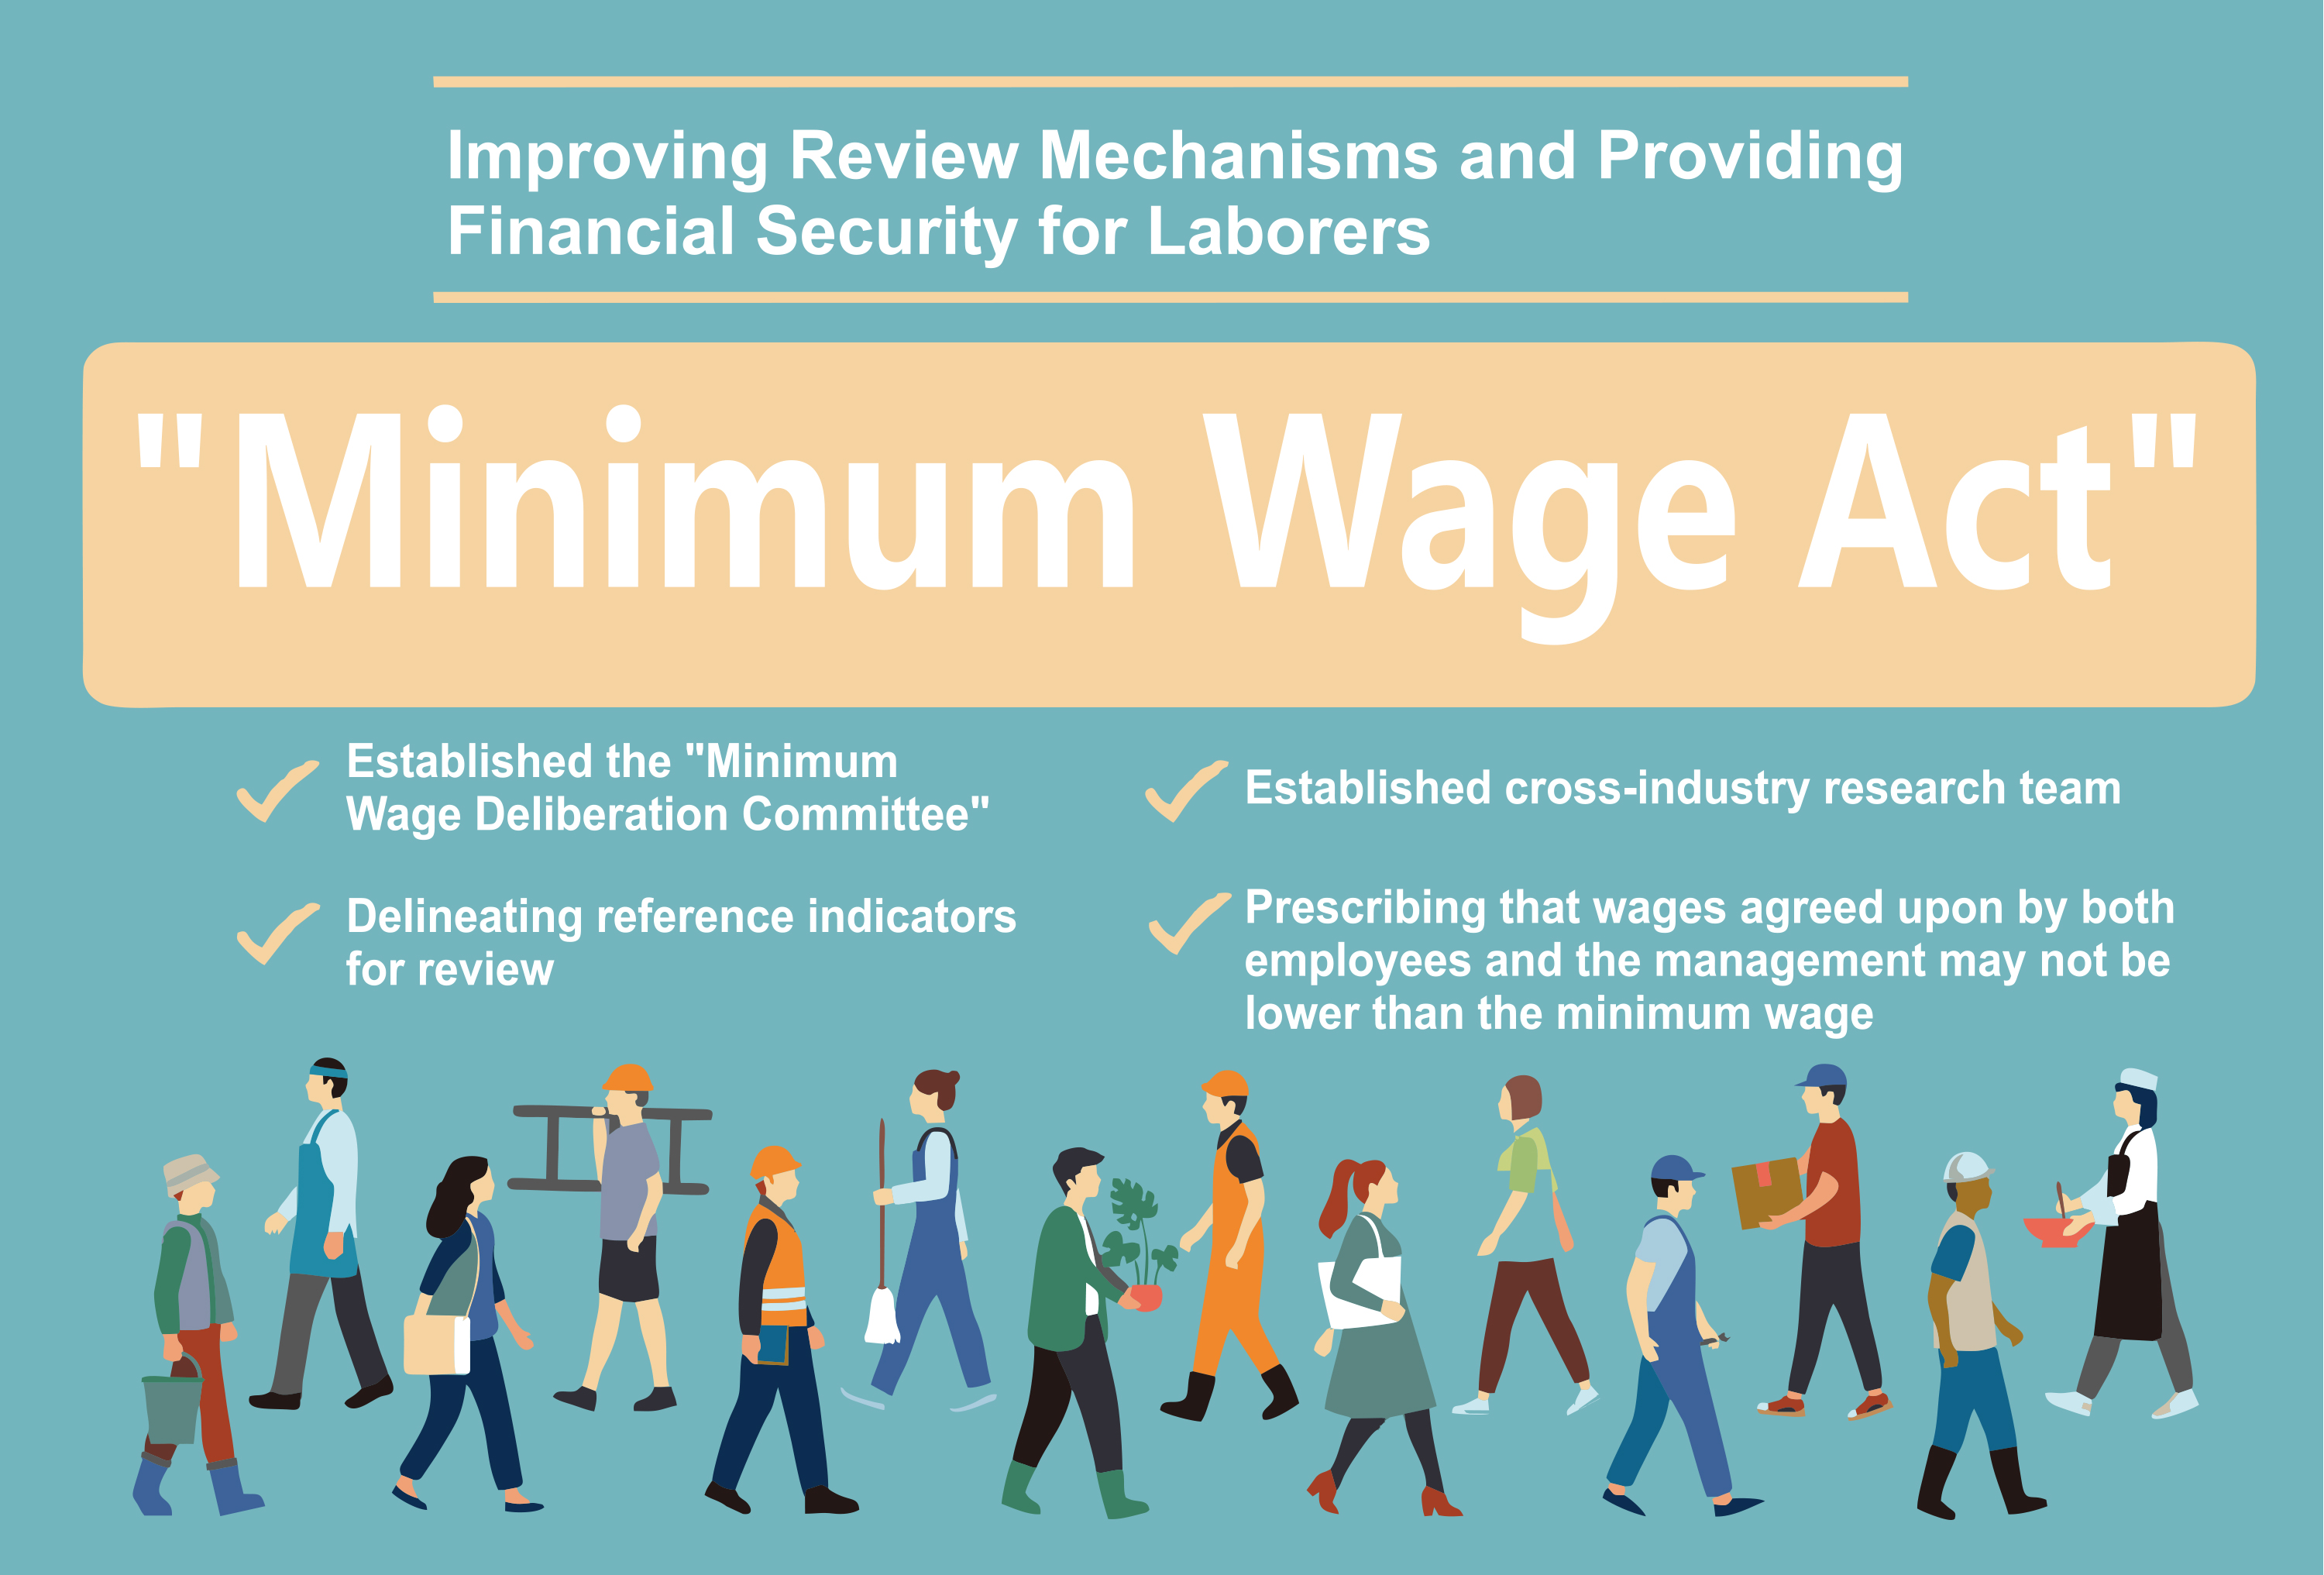 "Minimum Wage Act" Implemented on January 1 in Support of Basic Wage to Protect Financial Security for the Average Worker